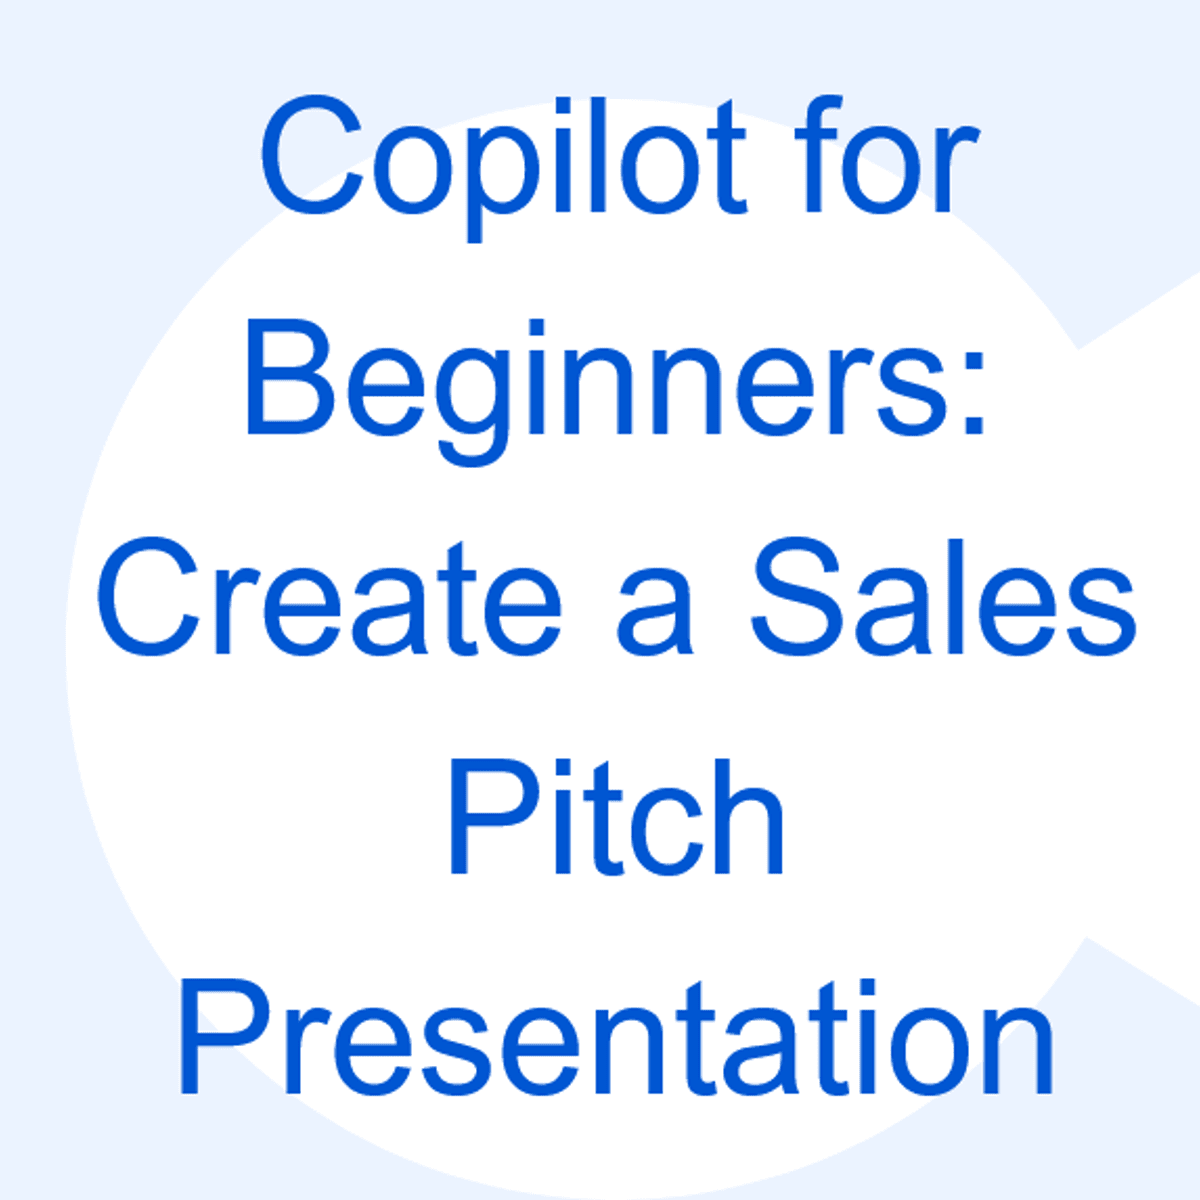 Copilot for Beginners: Create a Sales Pitch Presentation